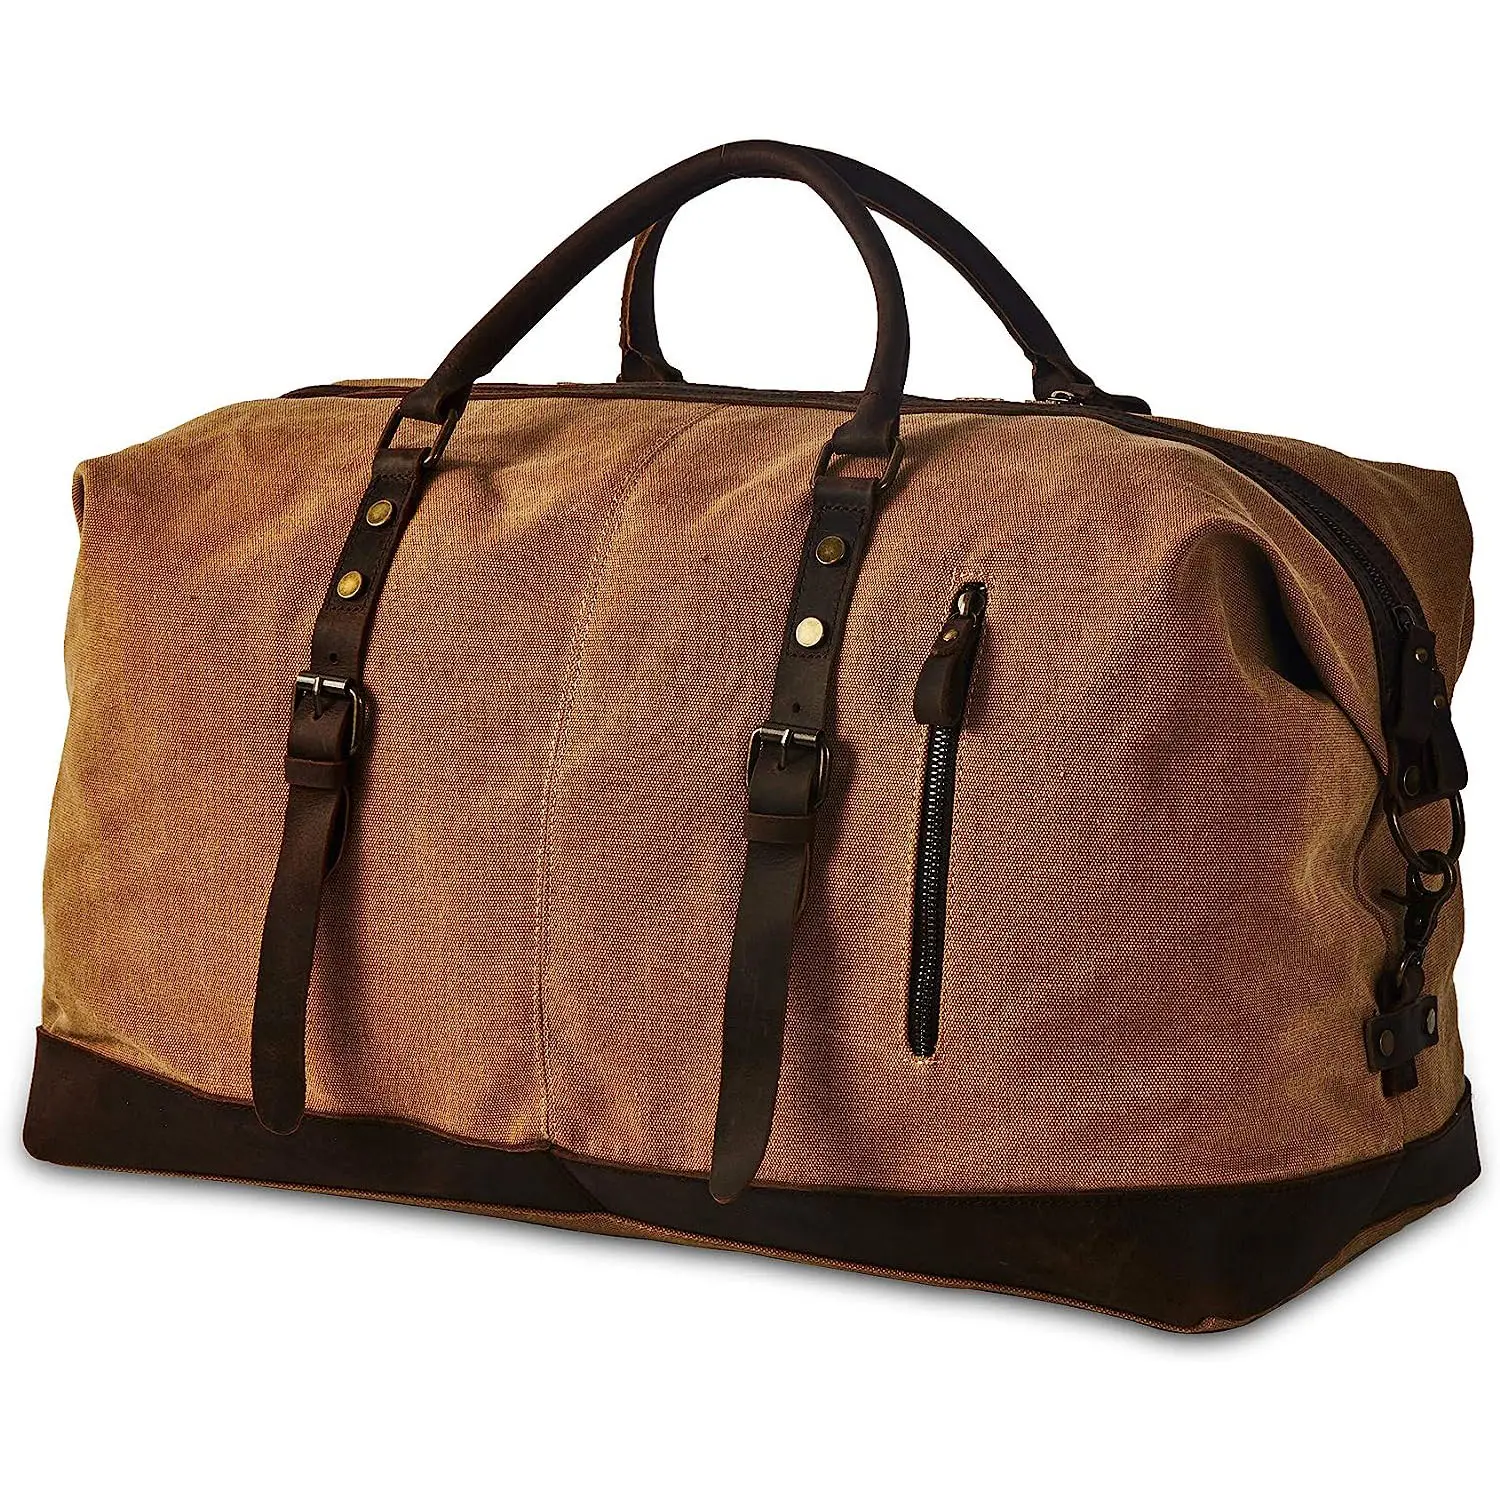 Men's Waxed Canvas Vintage Overnight Duffel Weekend Business Excursion Road Bag Travel Luggage